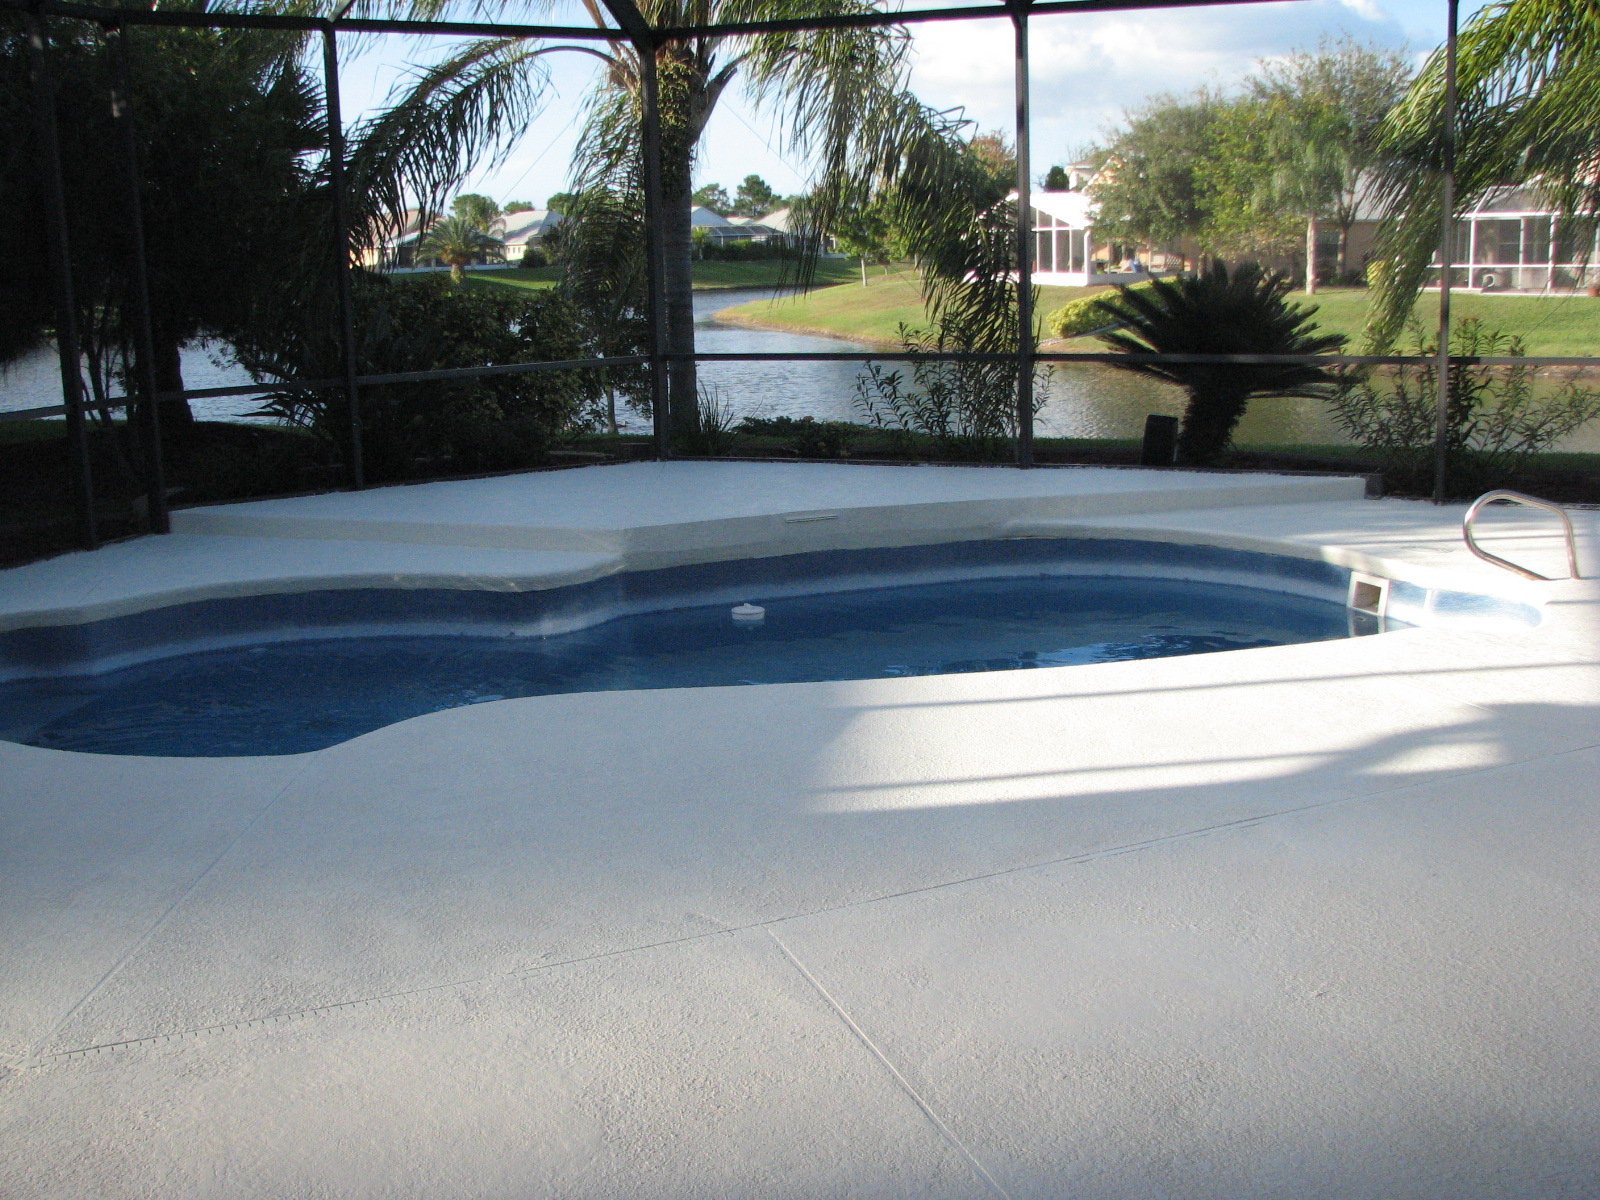 Pool Deck and Lanai- After photo